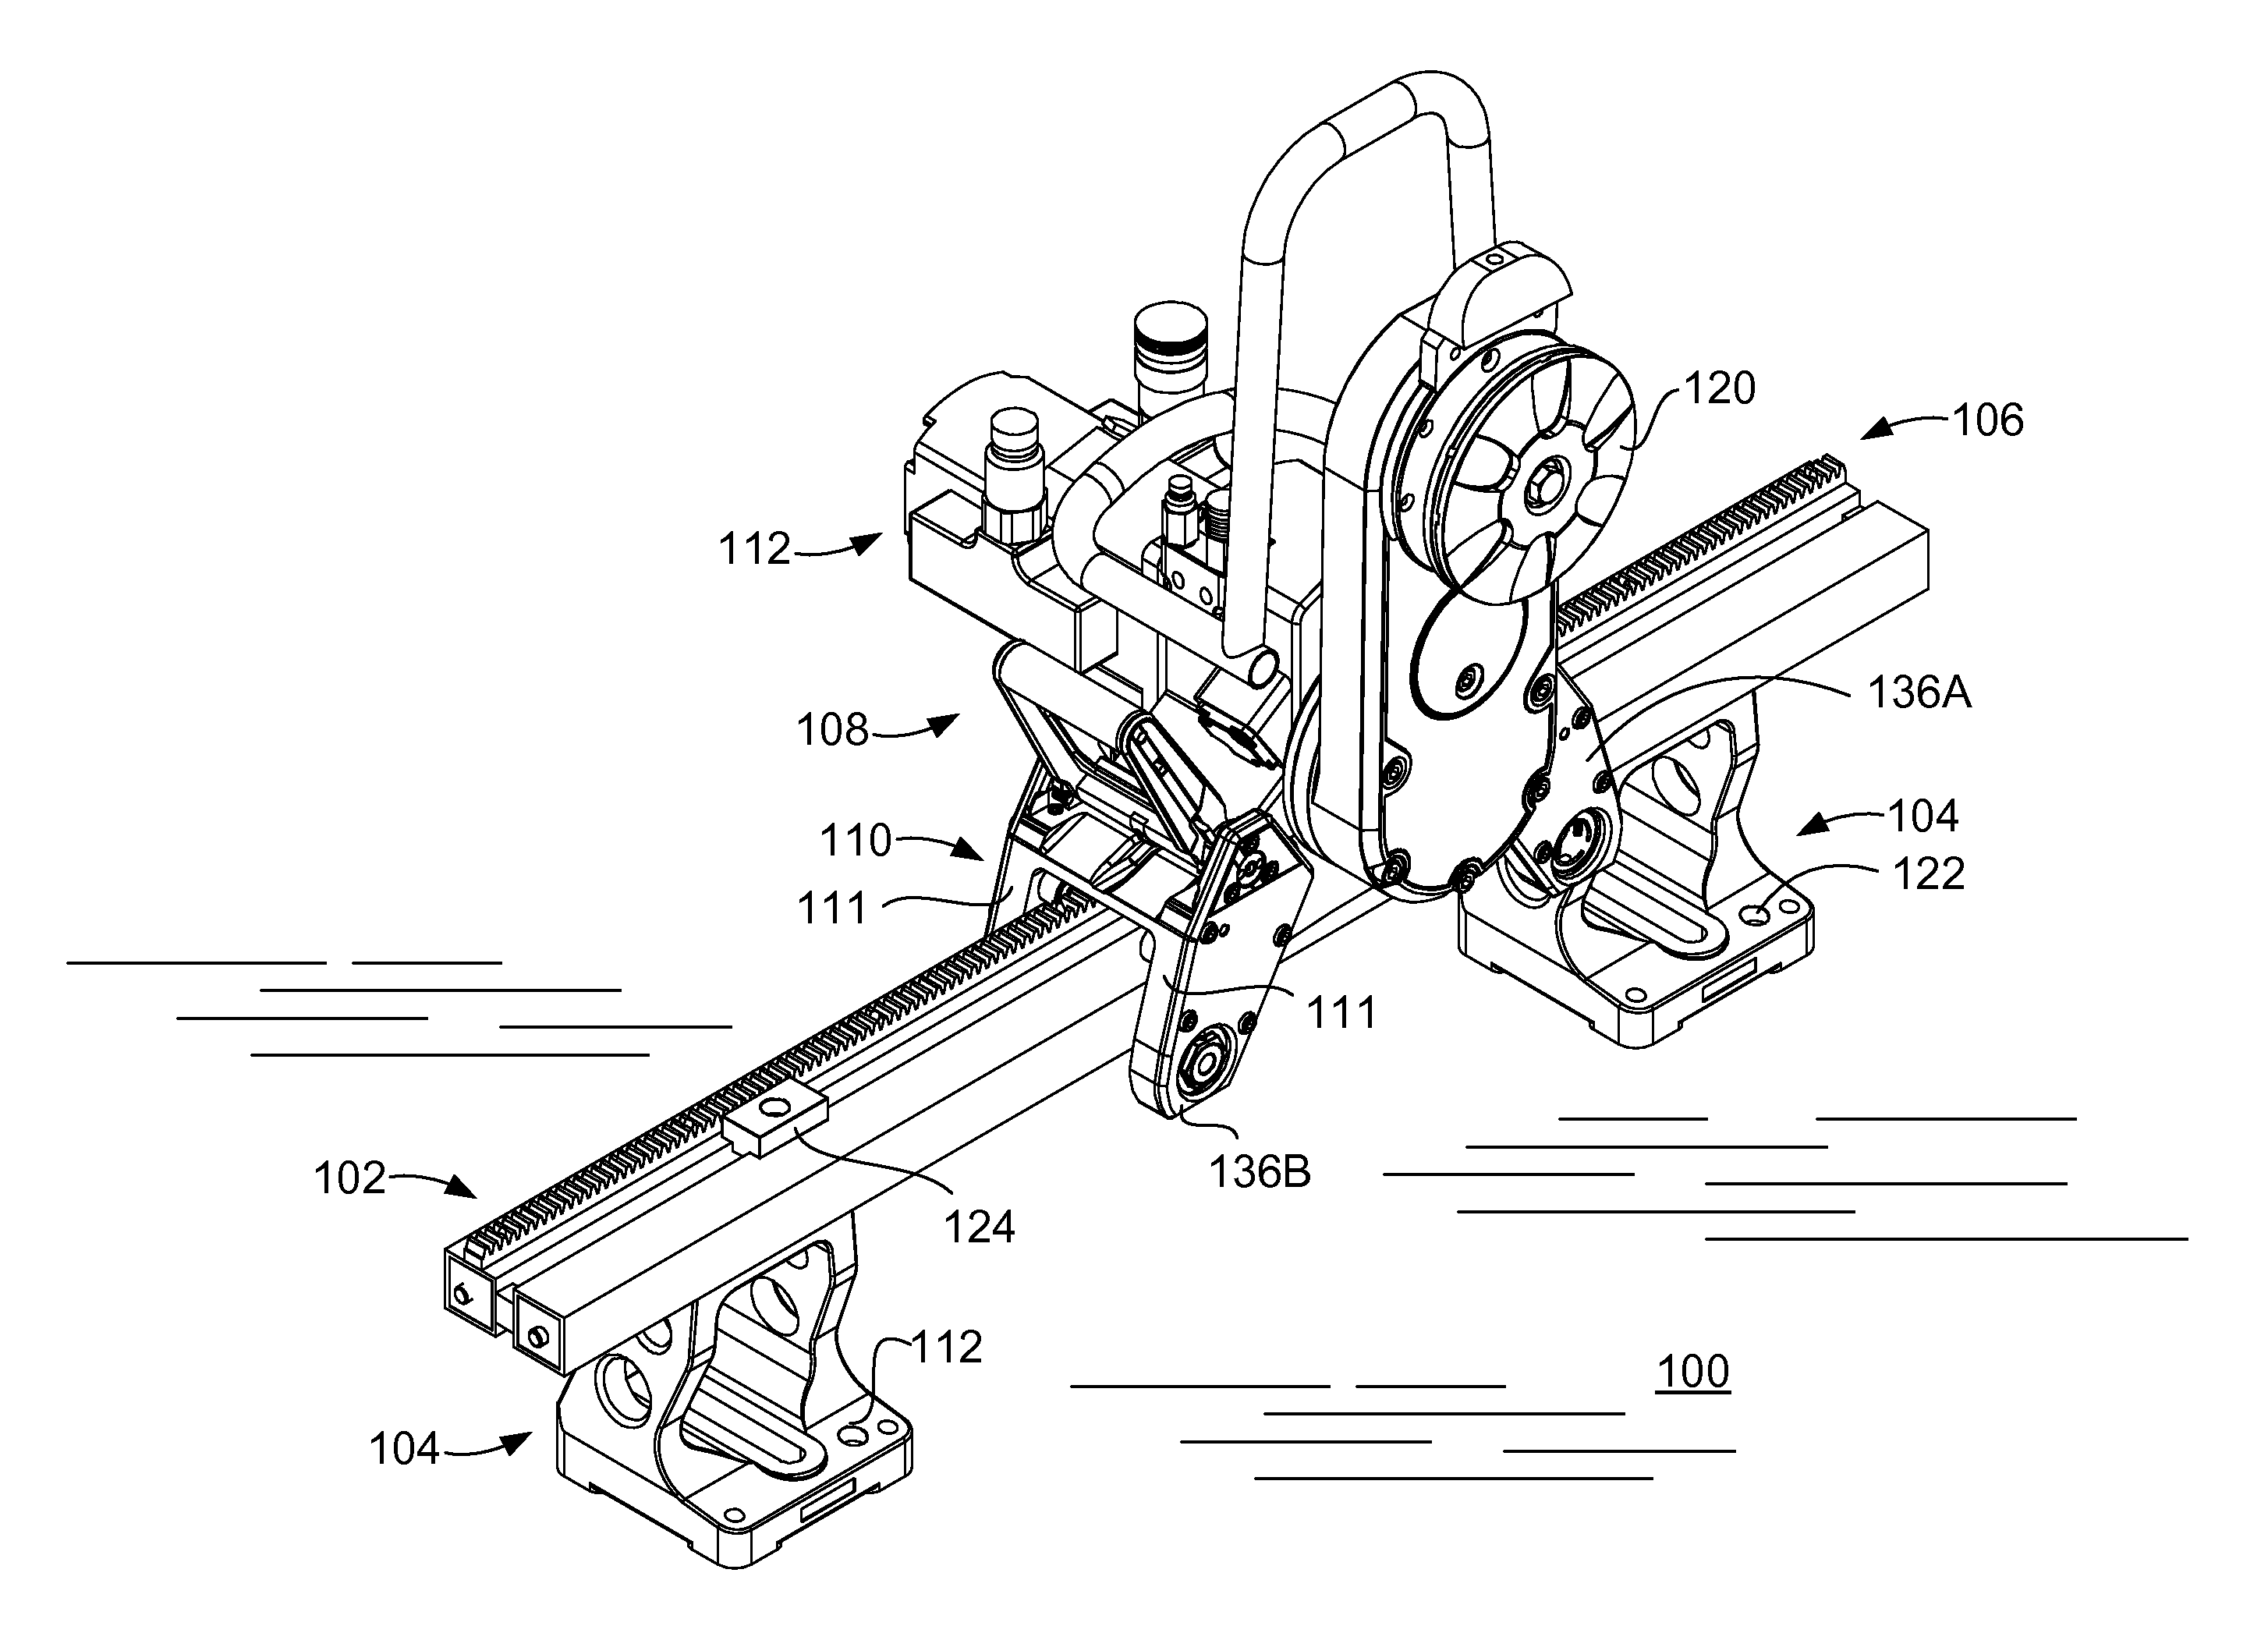 Methods and apparatus for movable machining tools, including for wall saws